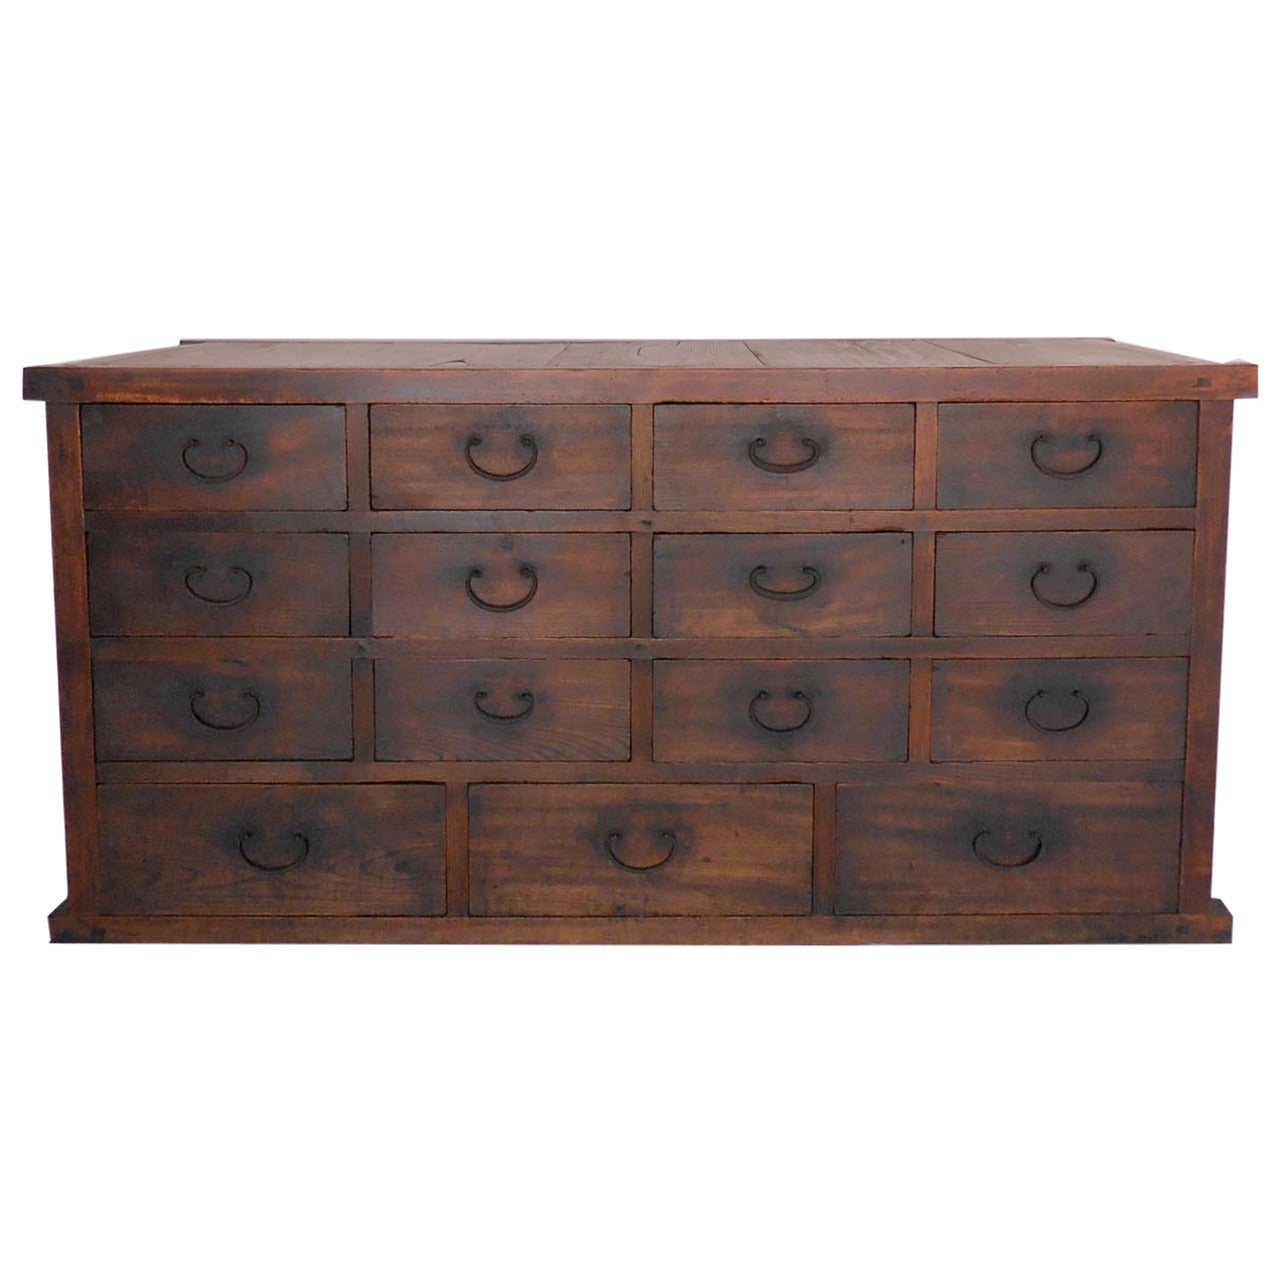 Antique Japanese Tansu Chest with 15 Drawers